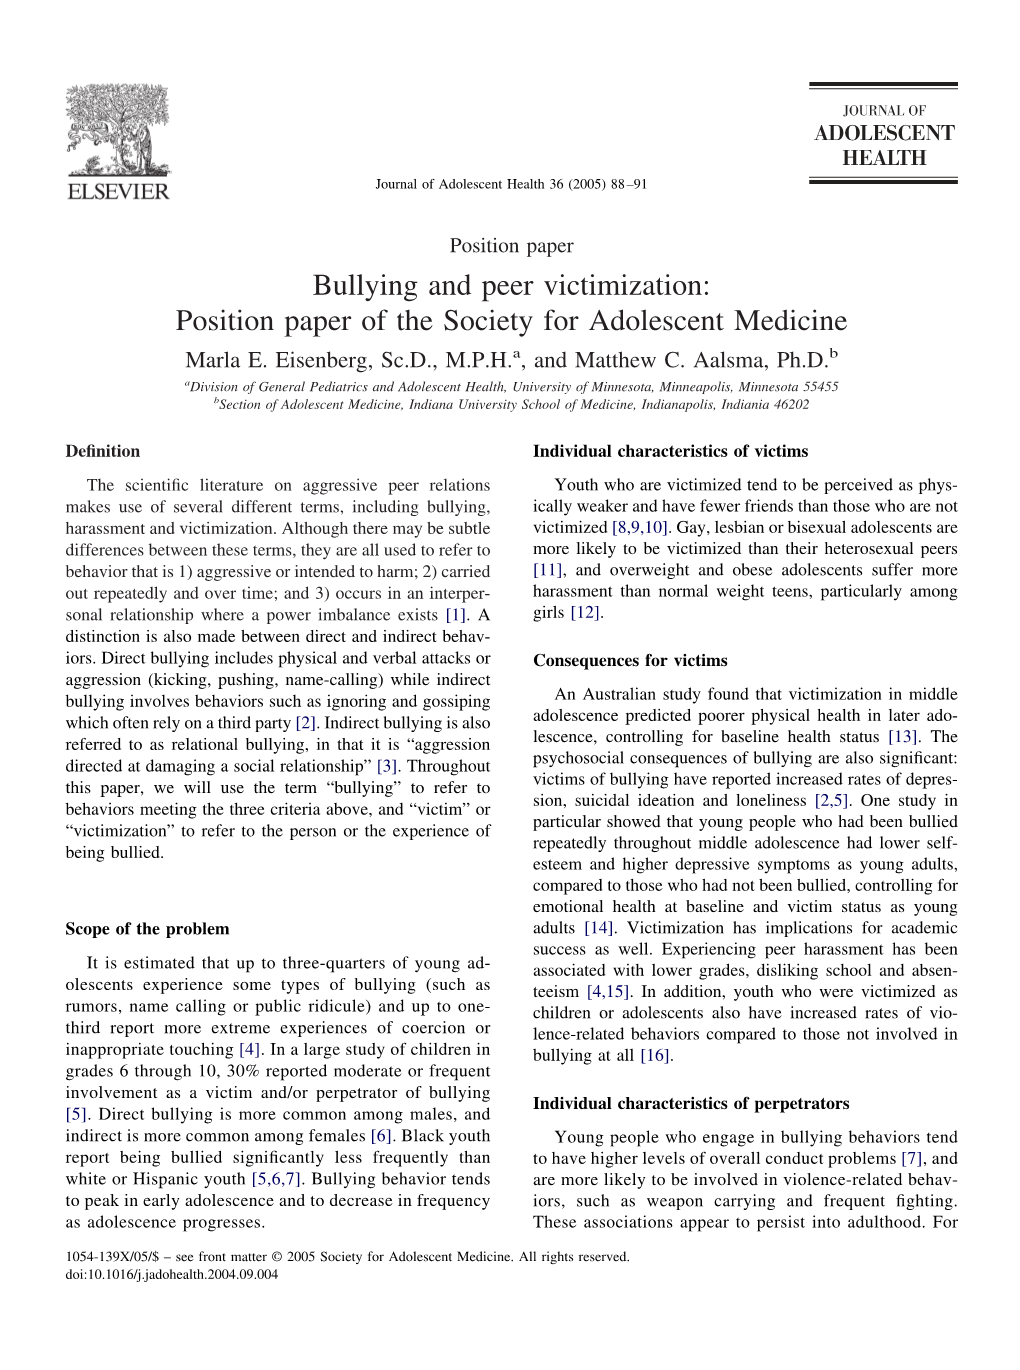 Bullying and Peer Victimization: Position Paper of the Society for Adolescent Medicine Marla E